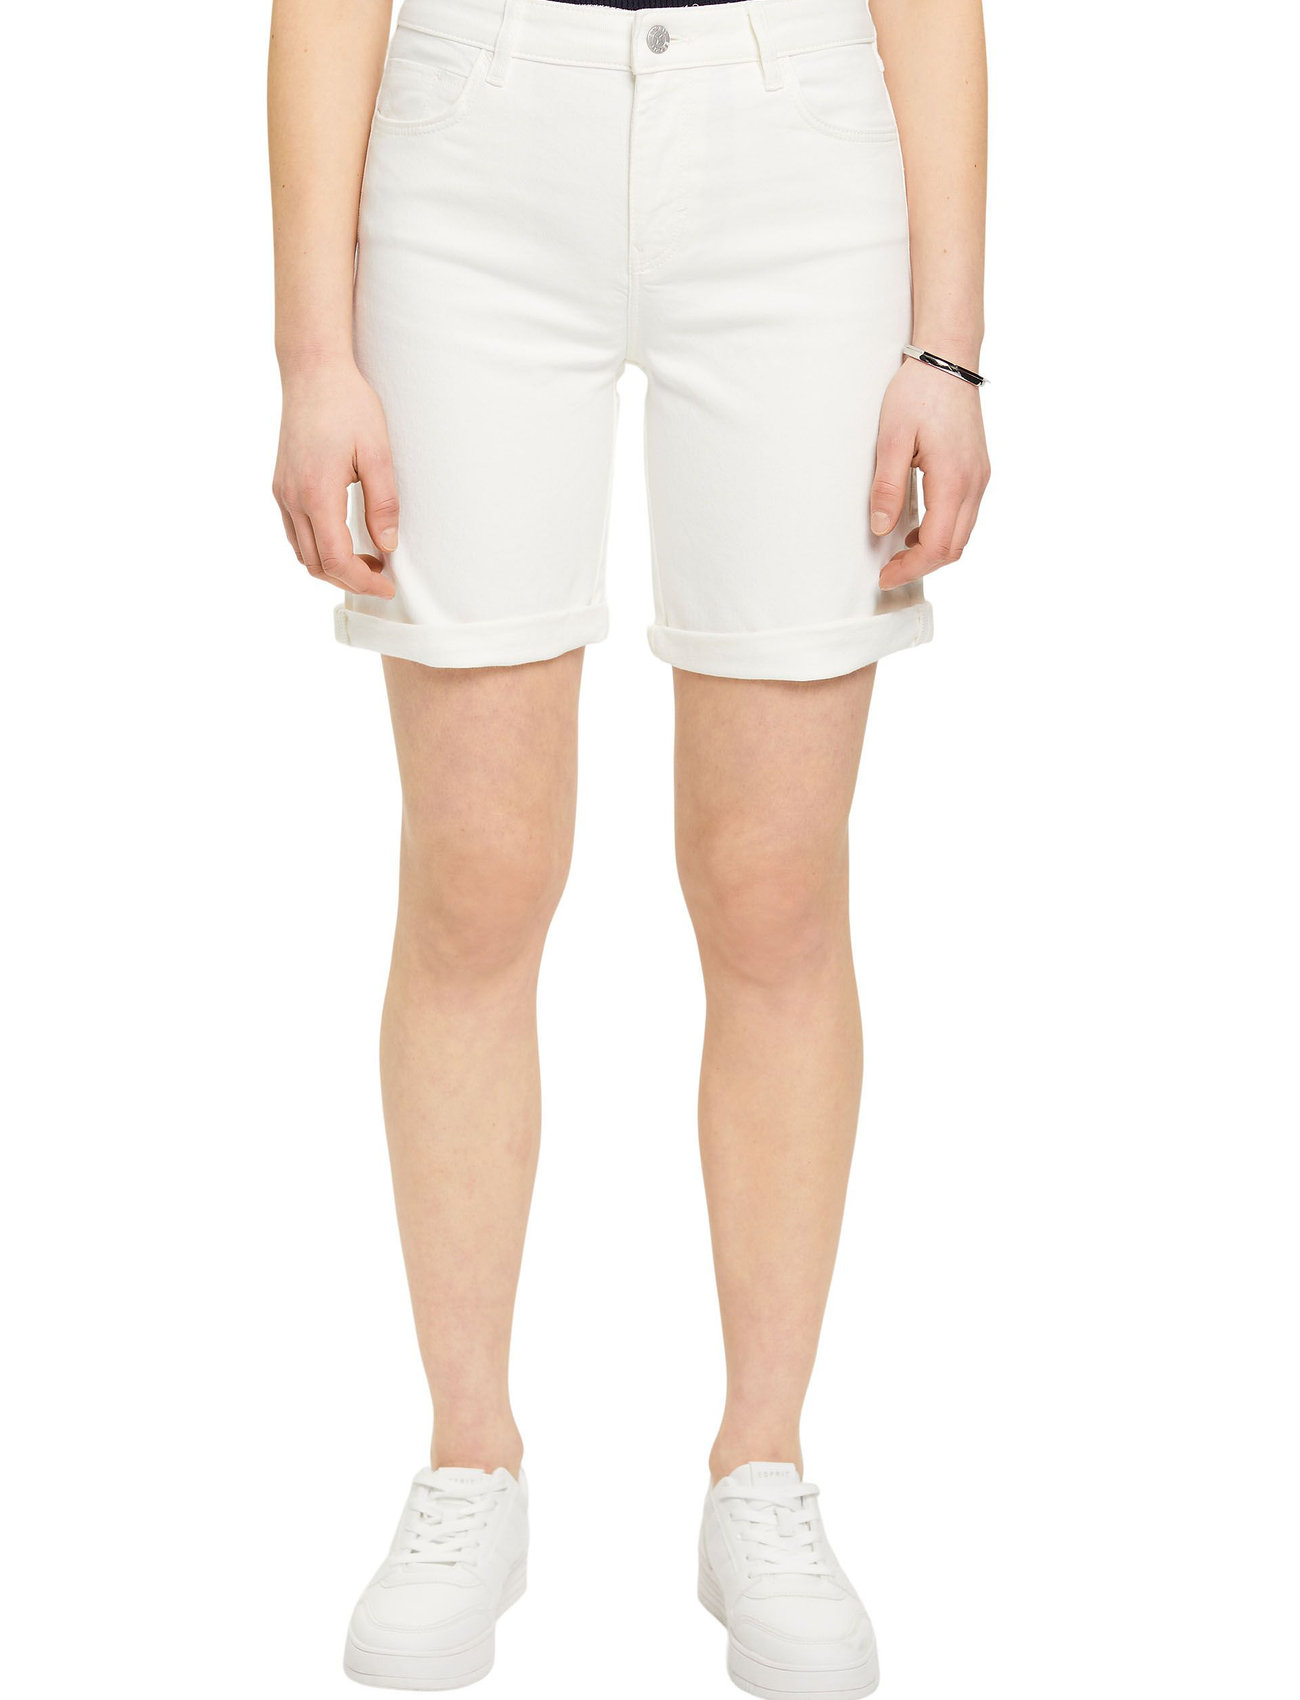 Esprit Casual - Cotton stretch shorts - jeansshorts - off white - 1